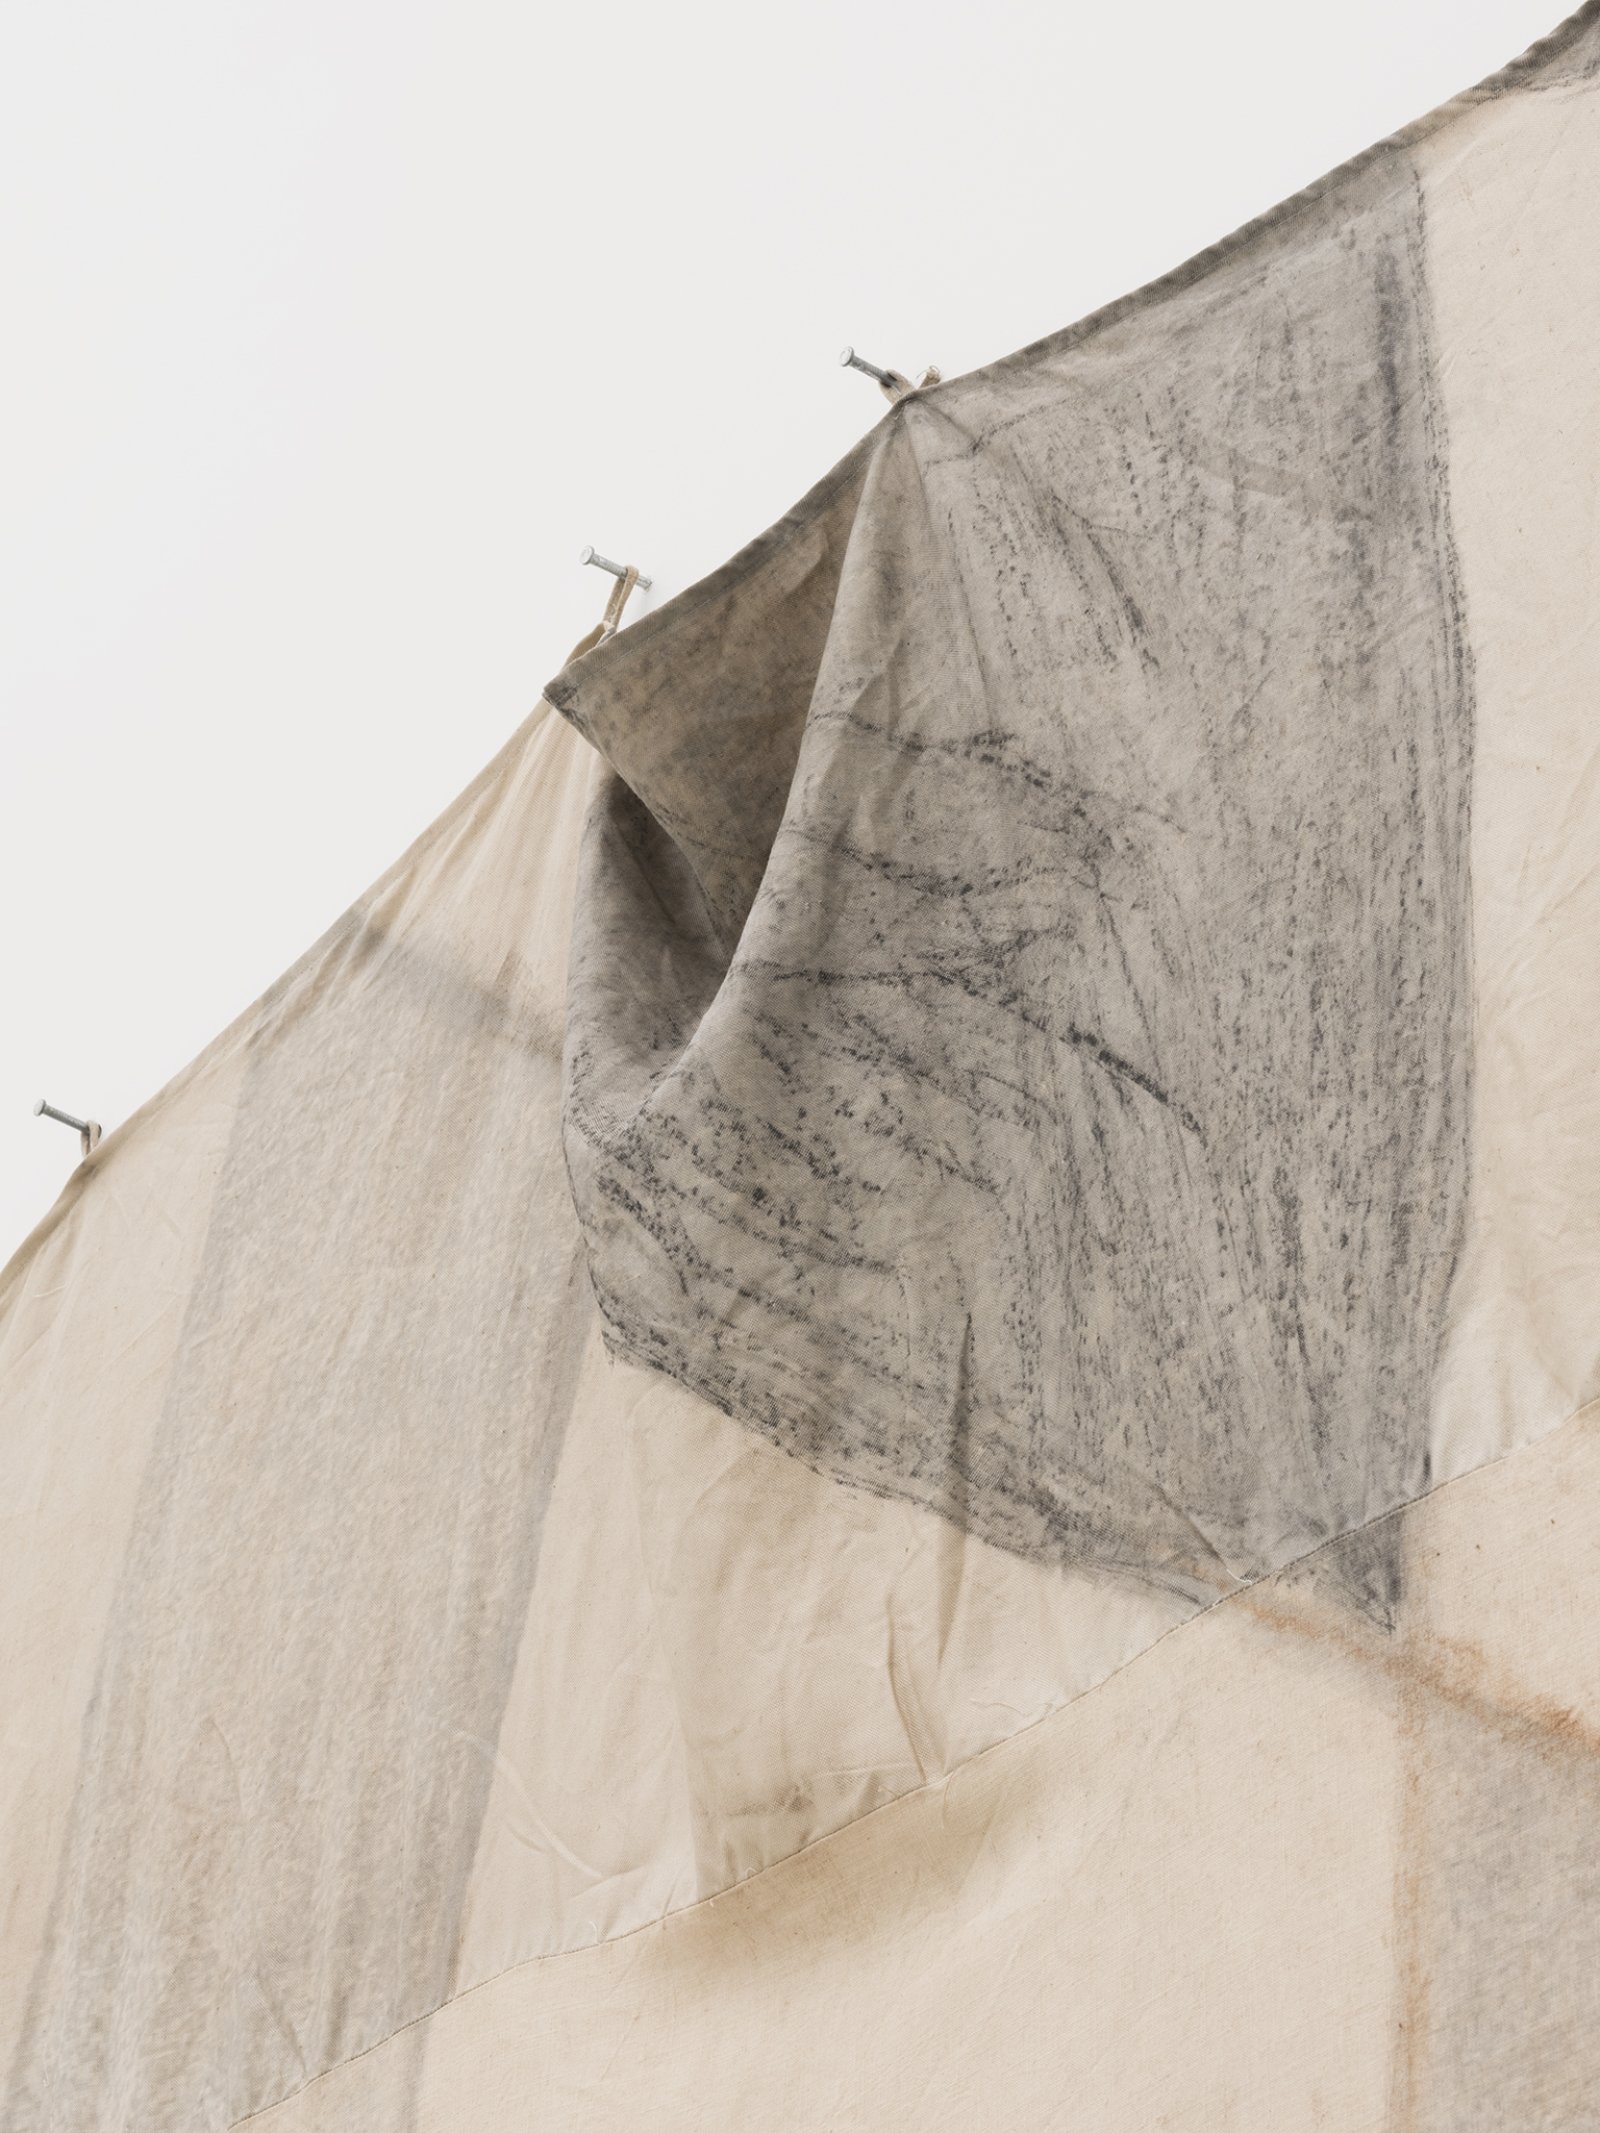 Duane Linklater, Tipi cover for unknown future horizon / Indian lemonade diamond for Mina (detail), 2018, digital print on hand-dyed linen, cedar, sumac, charcoal, nails, 113 x 213 in. (287 x 541 cm)